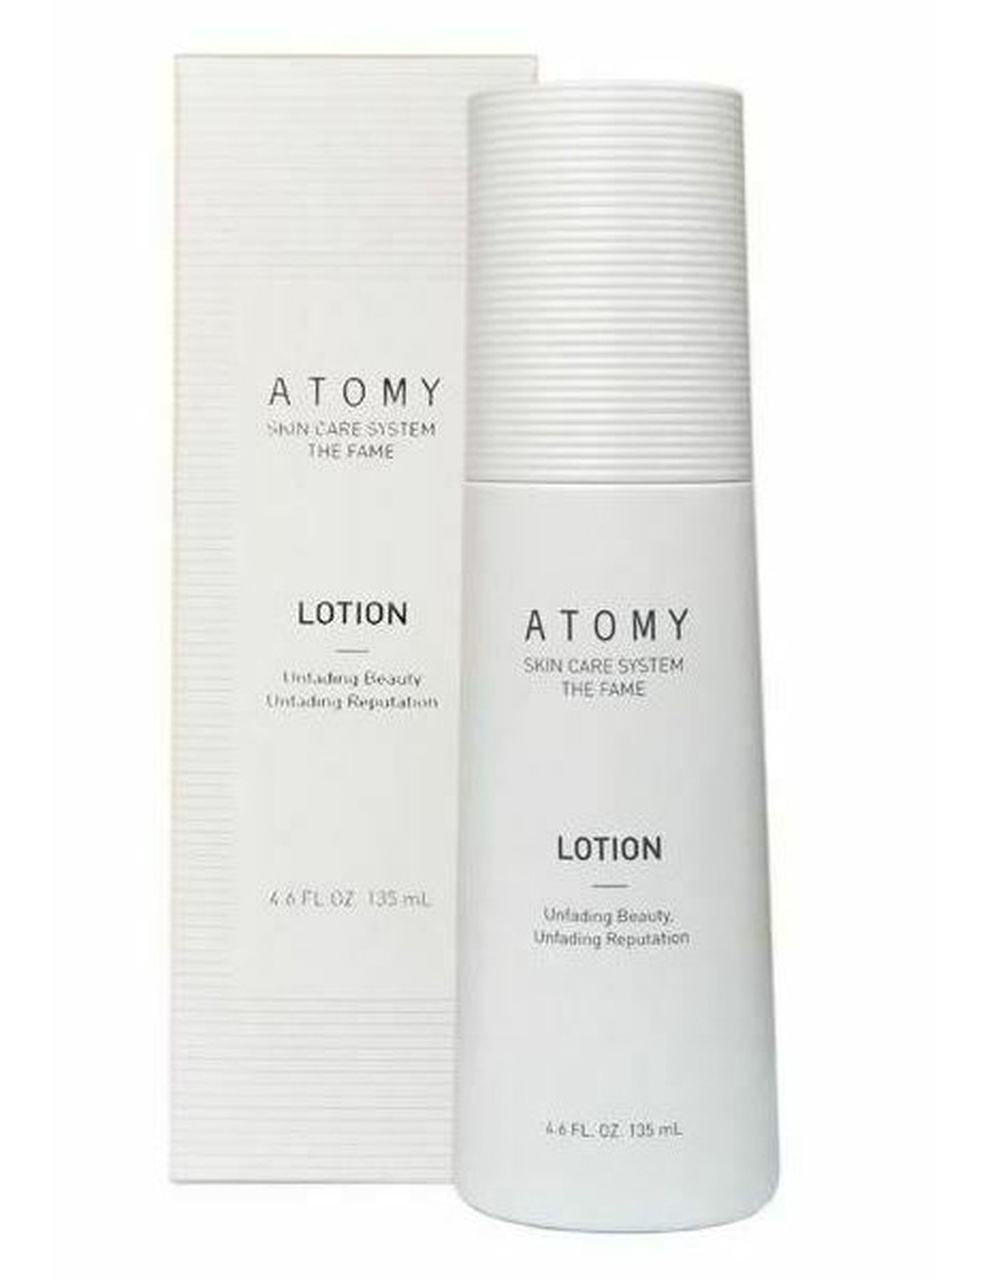 Atomy The Fame Lotion